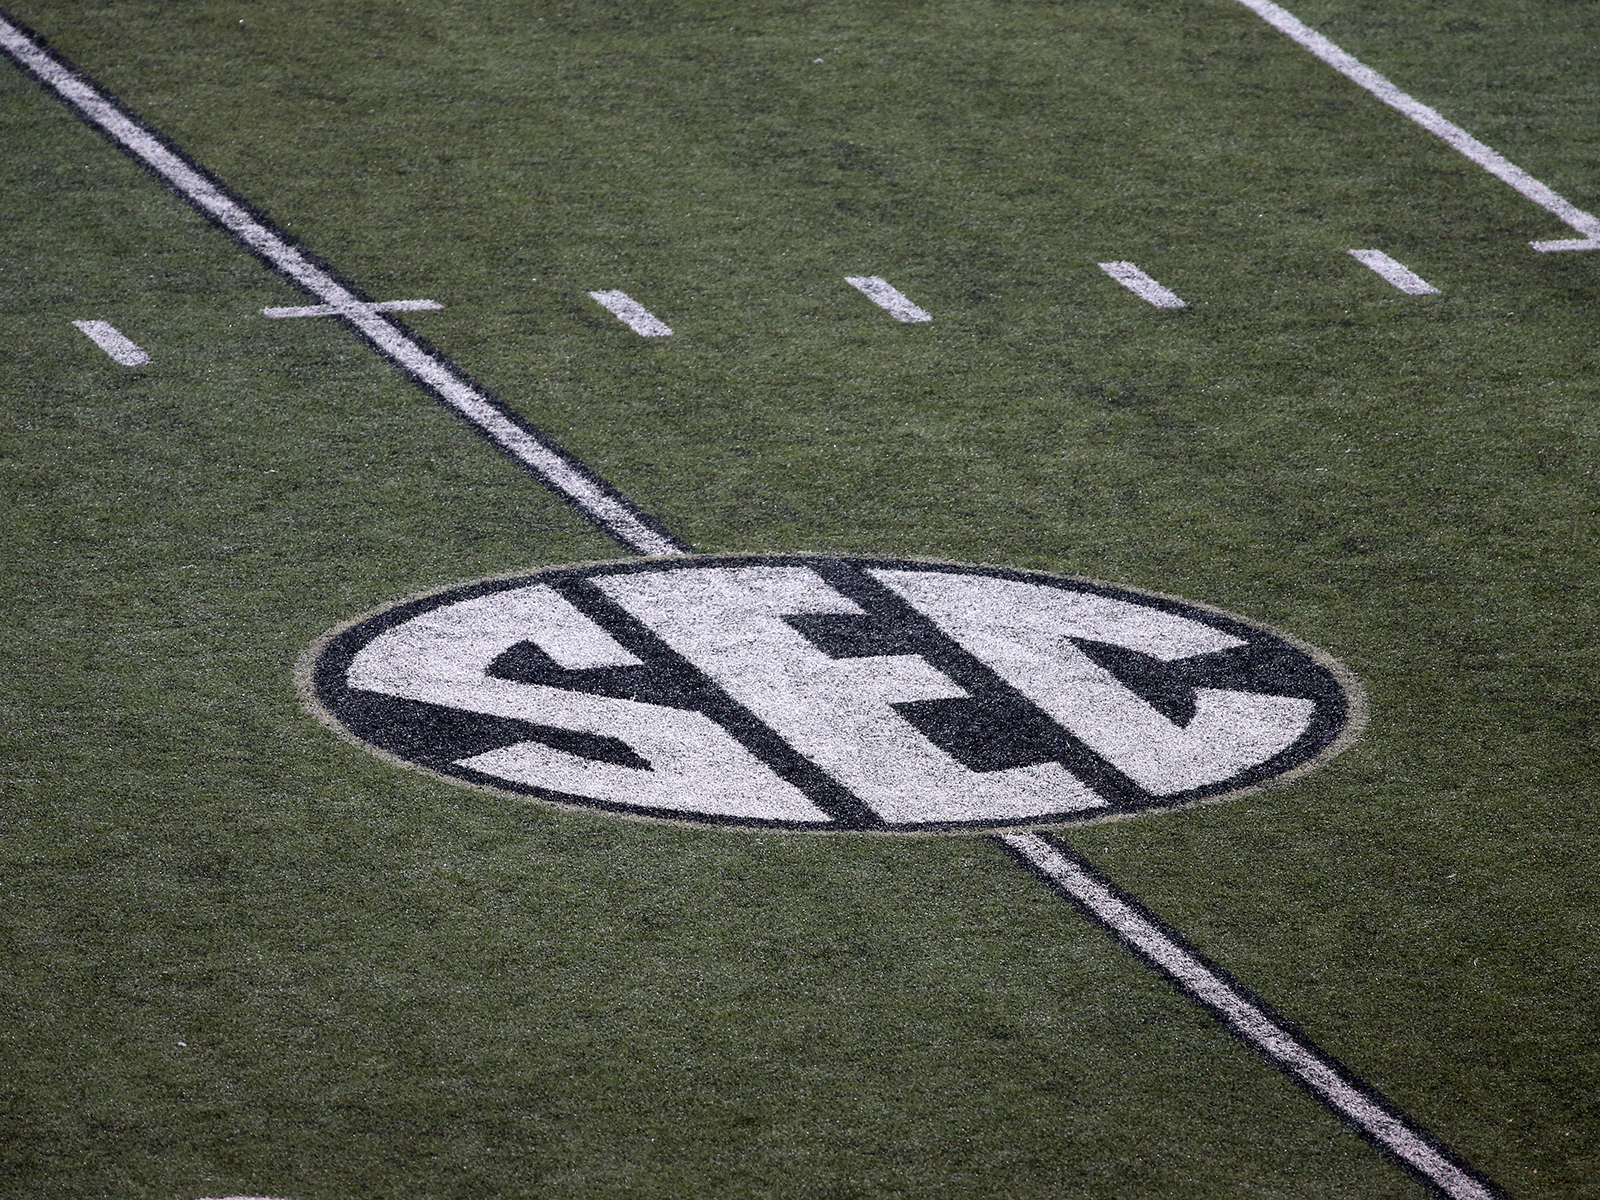 The SEC logo on Dudley Field prior to a game between the Vanderbilt Commodores and LSU Tigers, October 3, at Vanderbilt Stadium in Nashville, Tennessee.